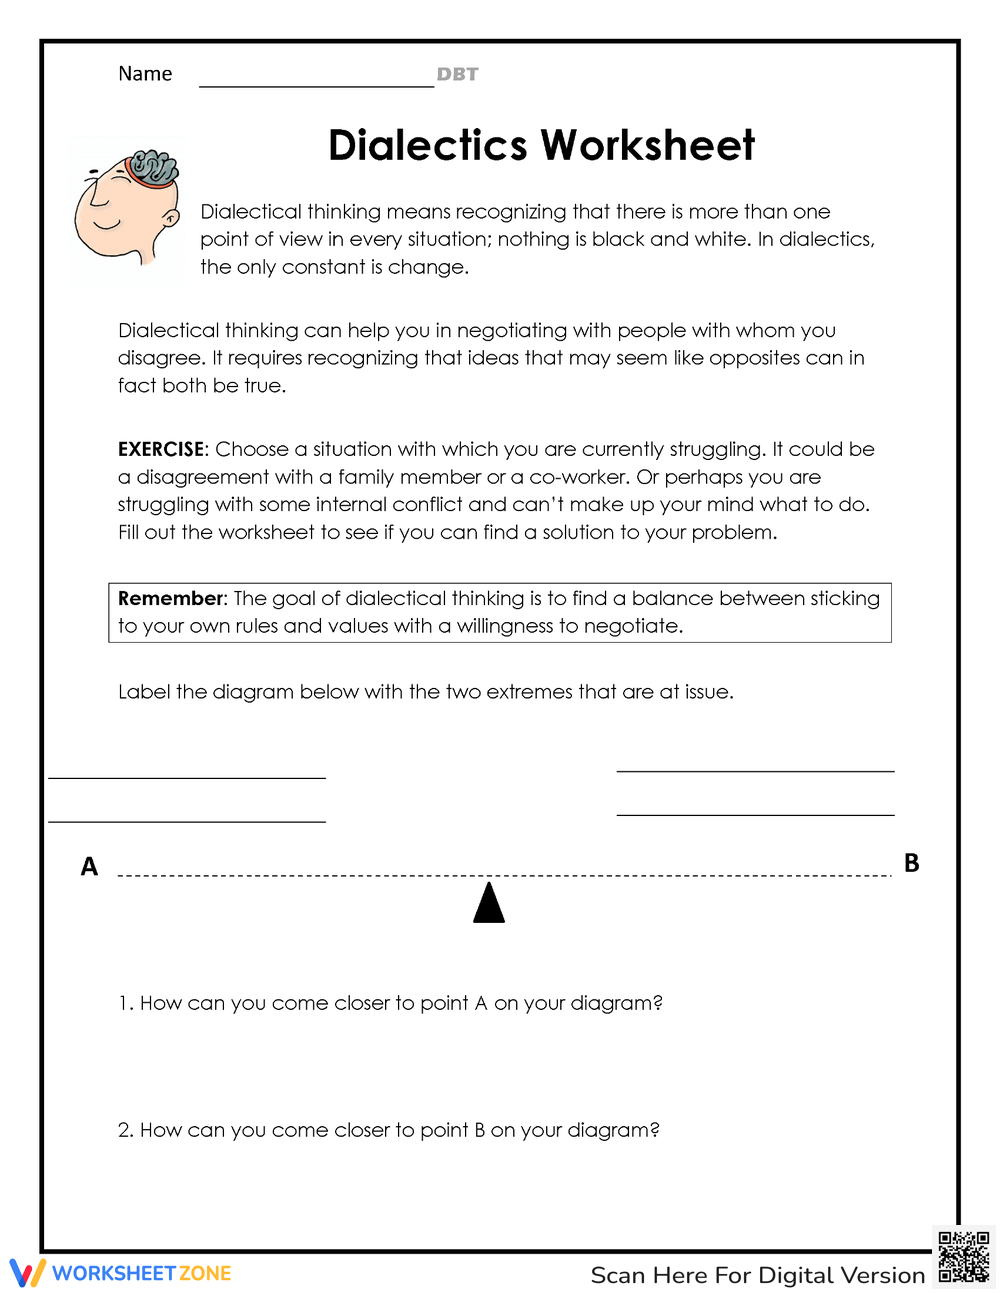 60 Dialectics Worksheet Collection For Teaching Learning